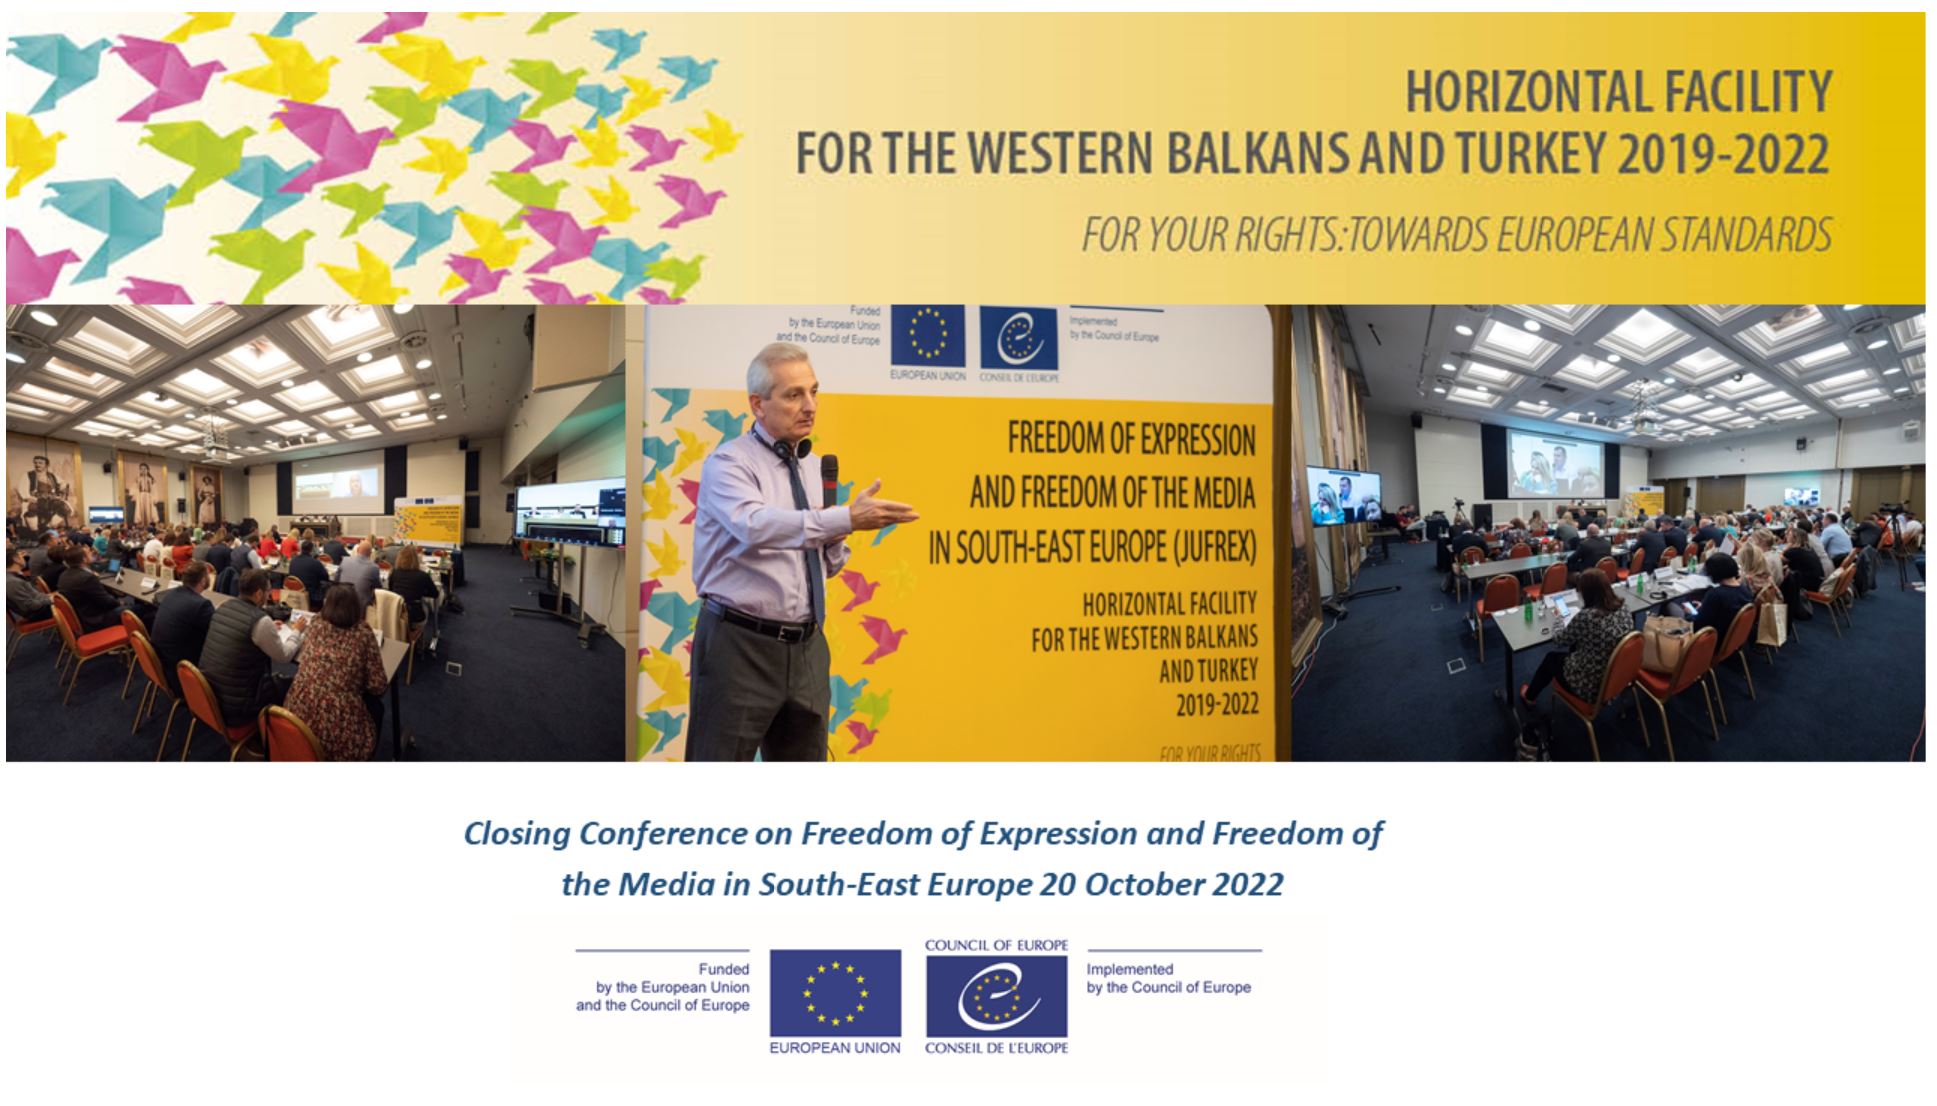 The achievements of regional co-operation on freedom of expression and freedom of the media discussed in Montenegro